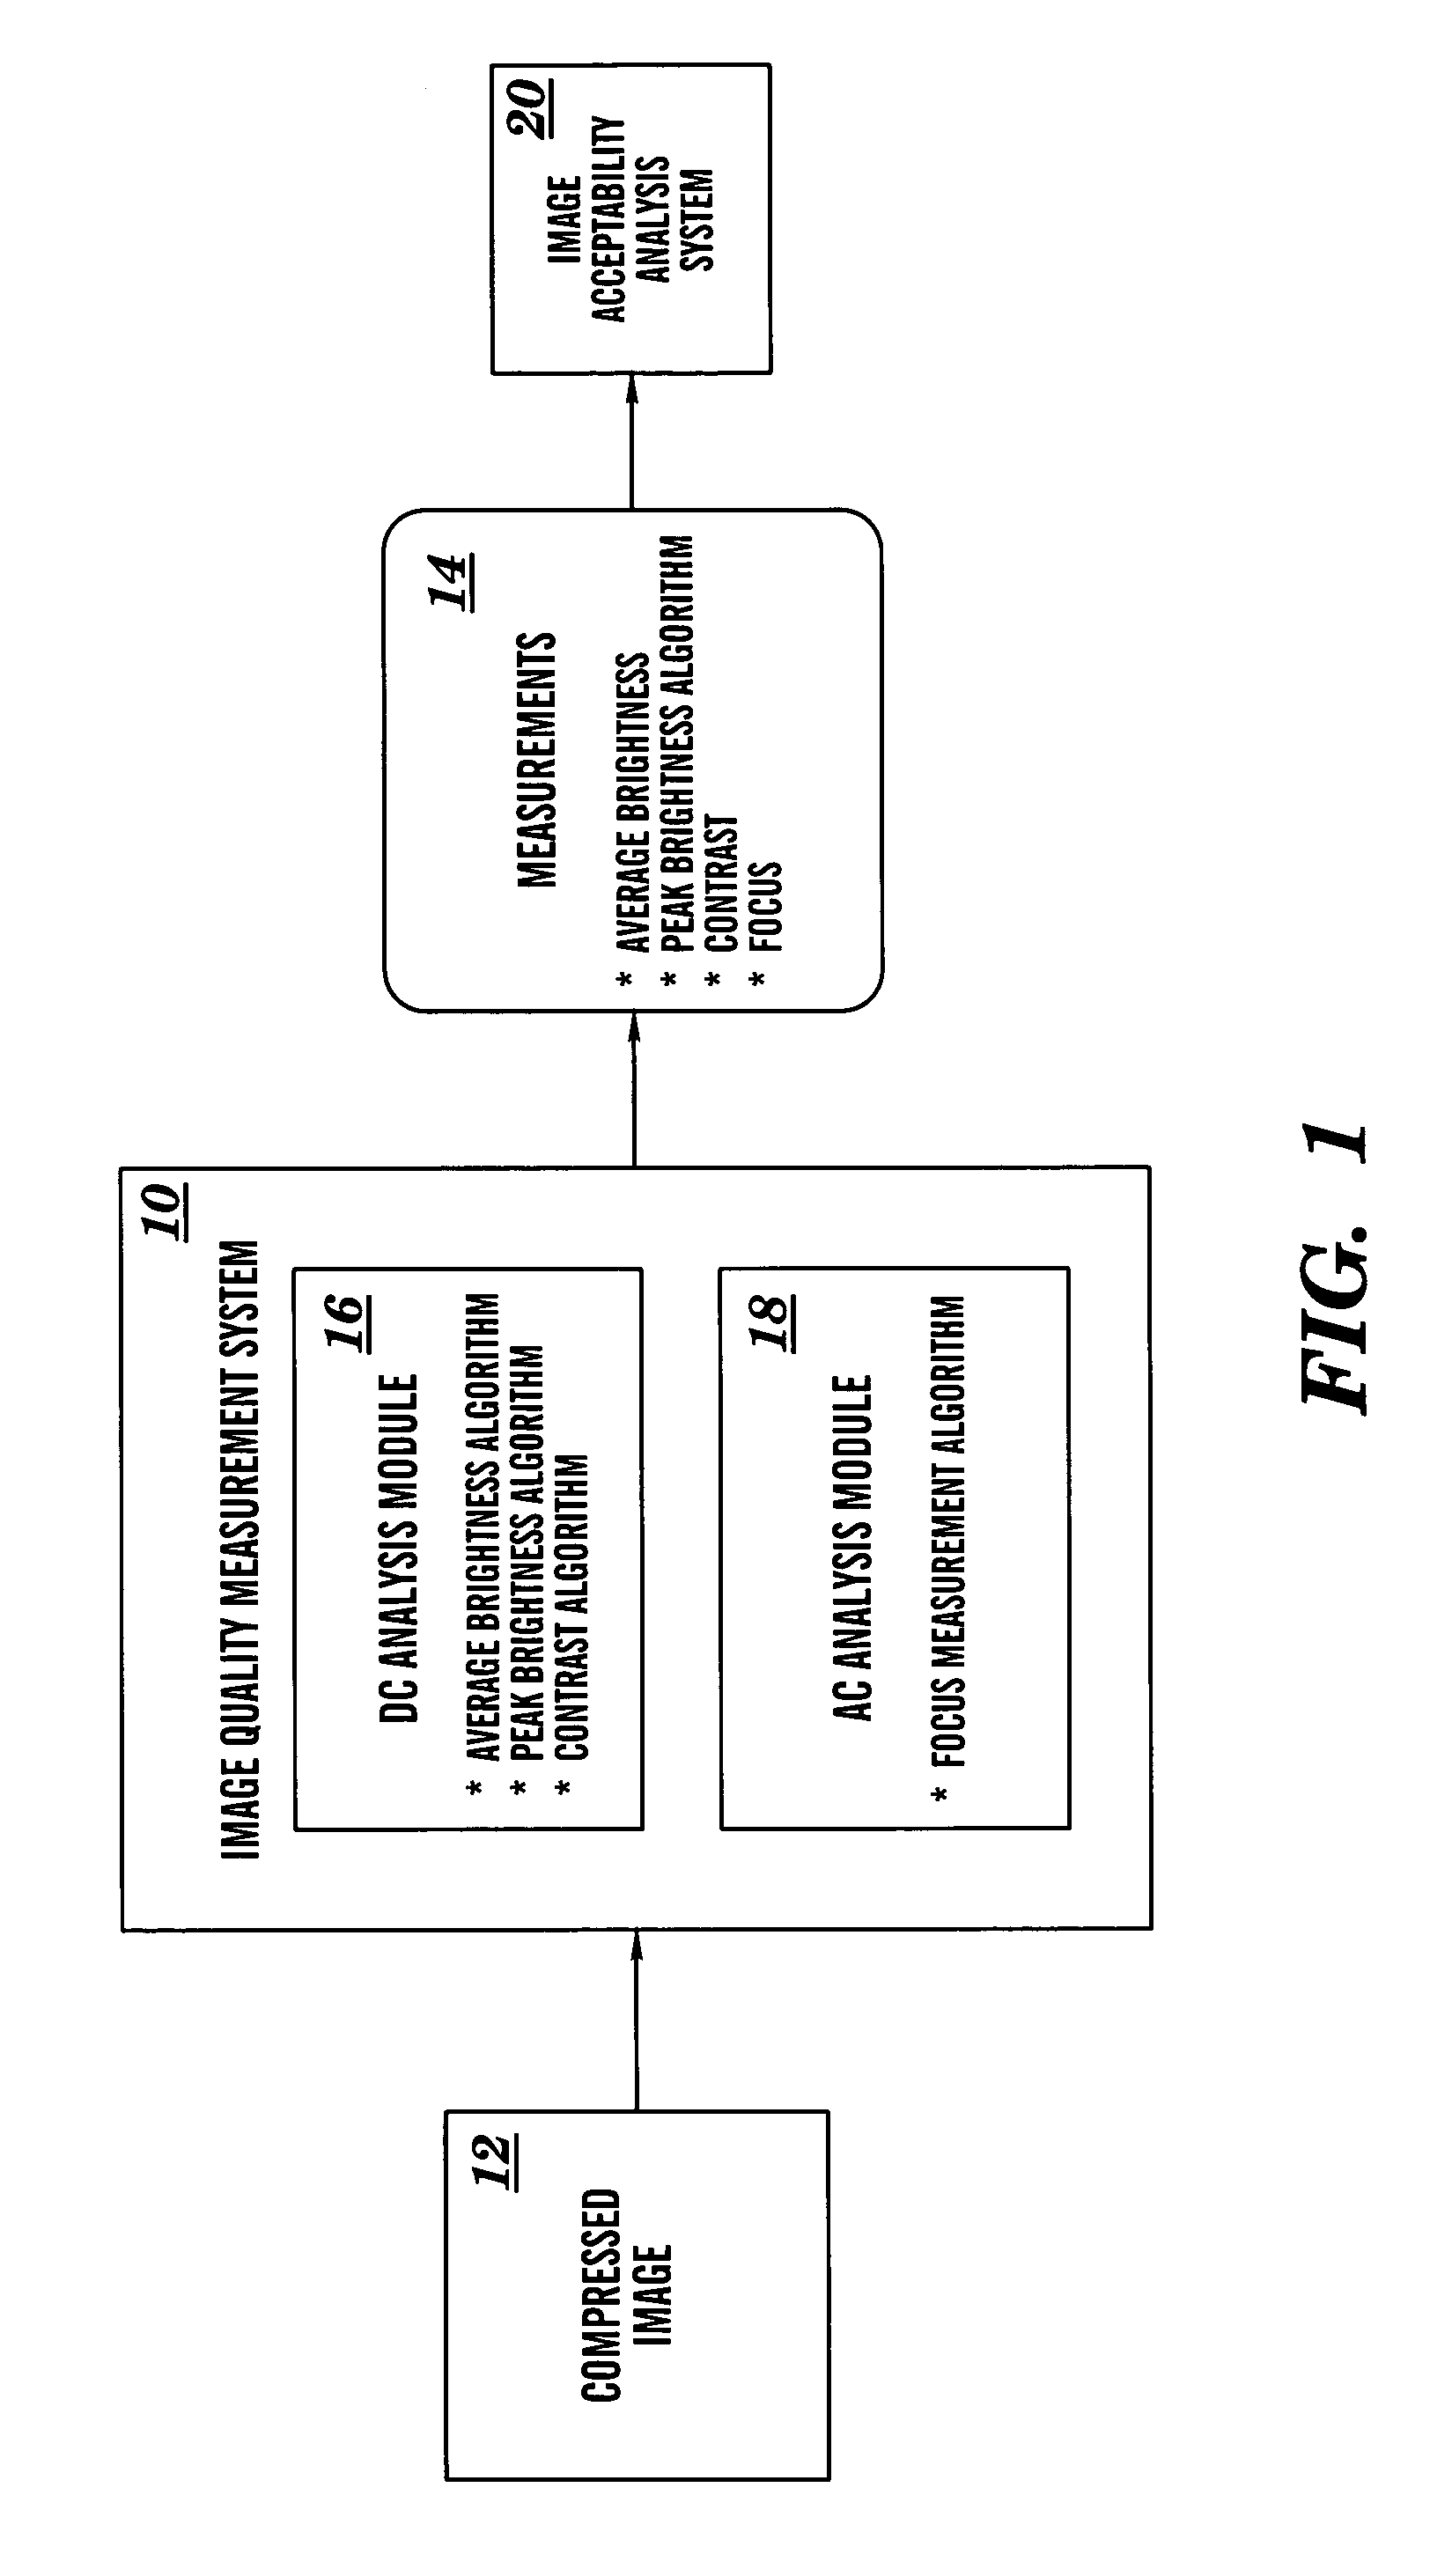 System and method for measuring image quality using compressed image data